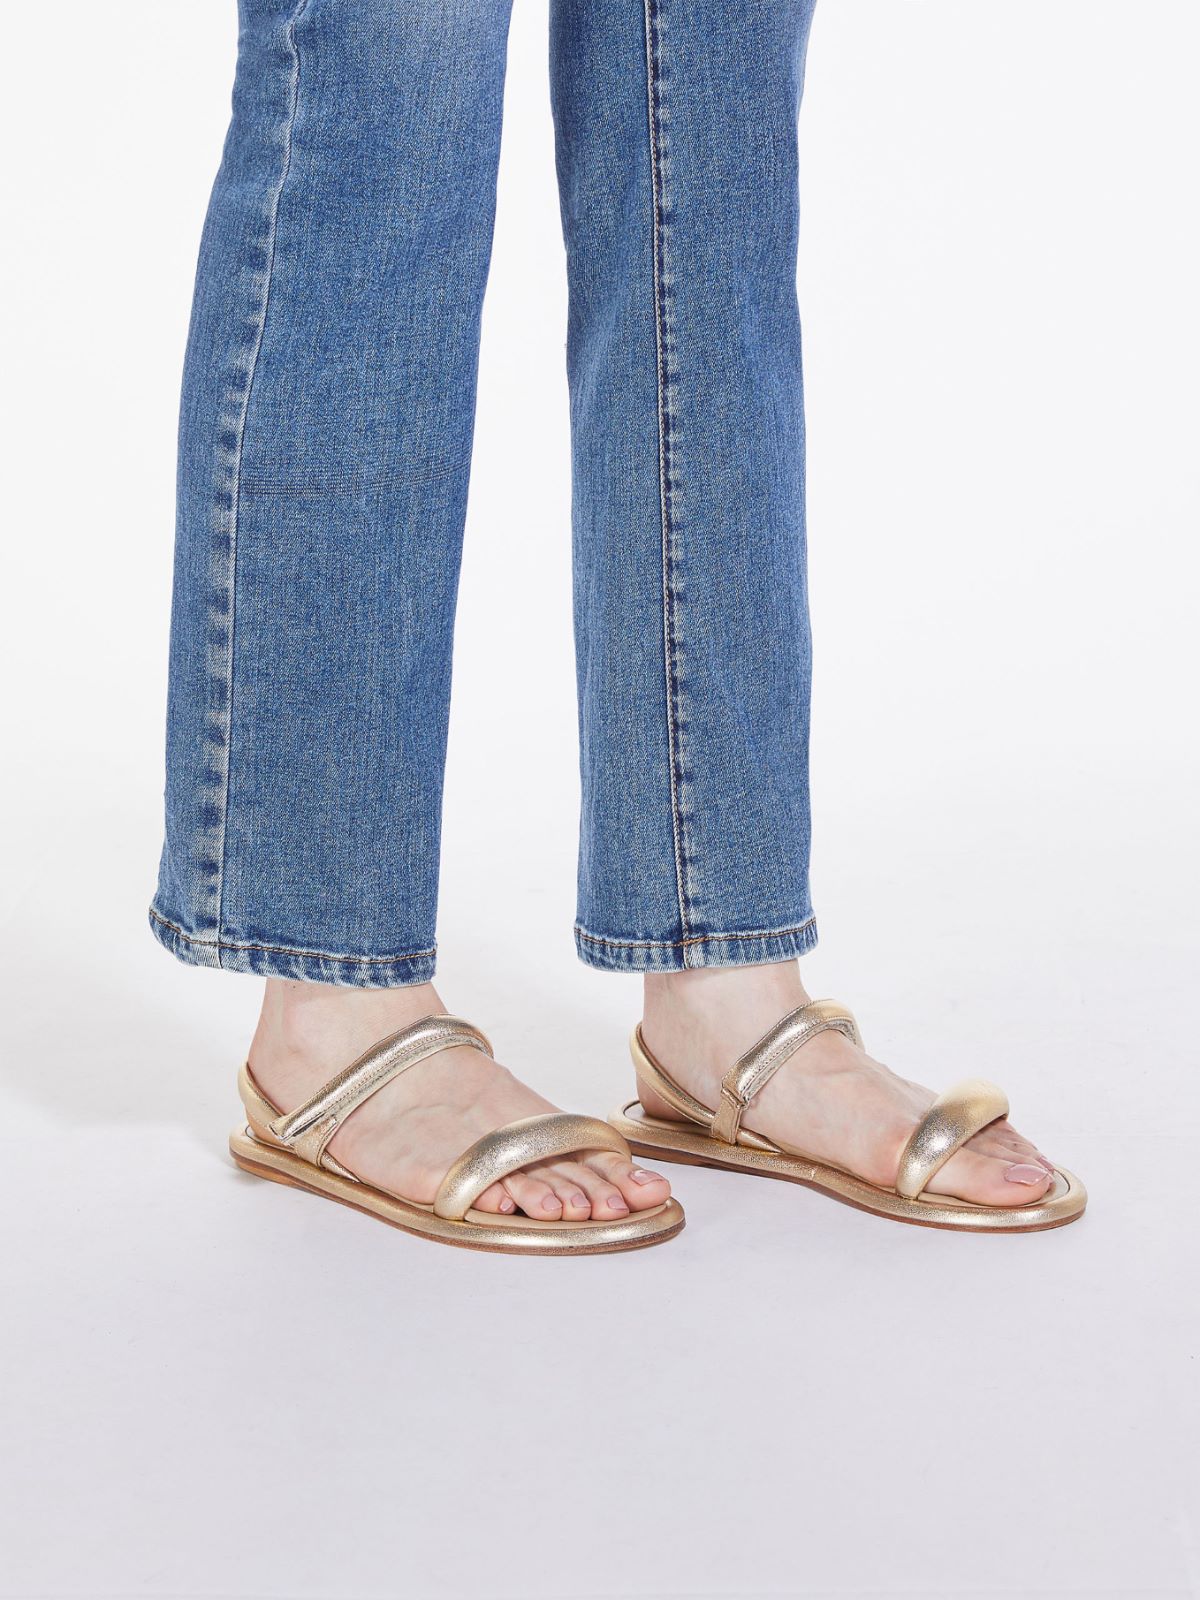 Sandals in nappa leather - GOLD - Weekend Max Mara - 6